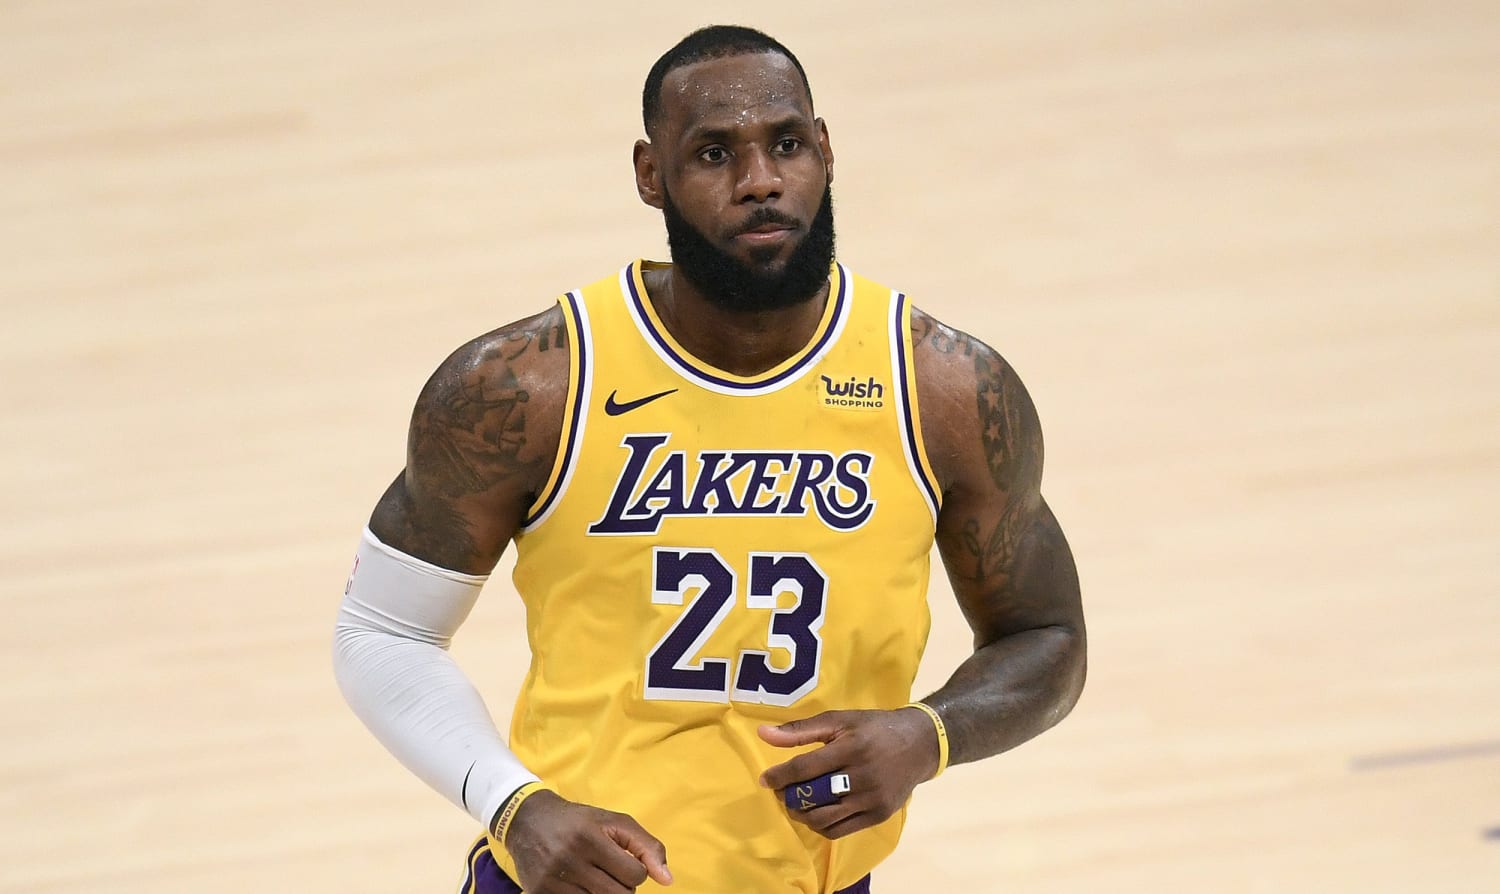 LeBron James will return to No. 23 next season out of respect for